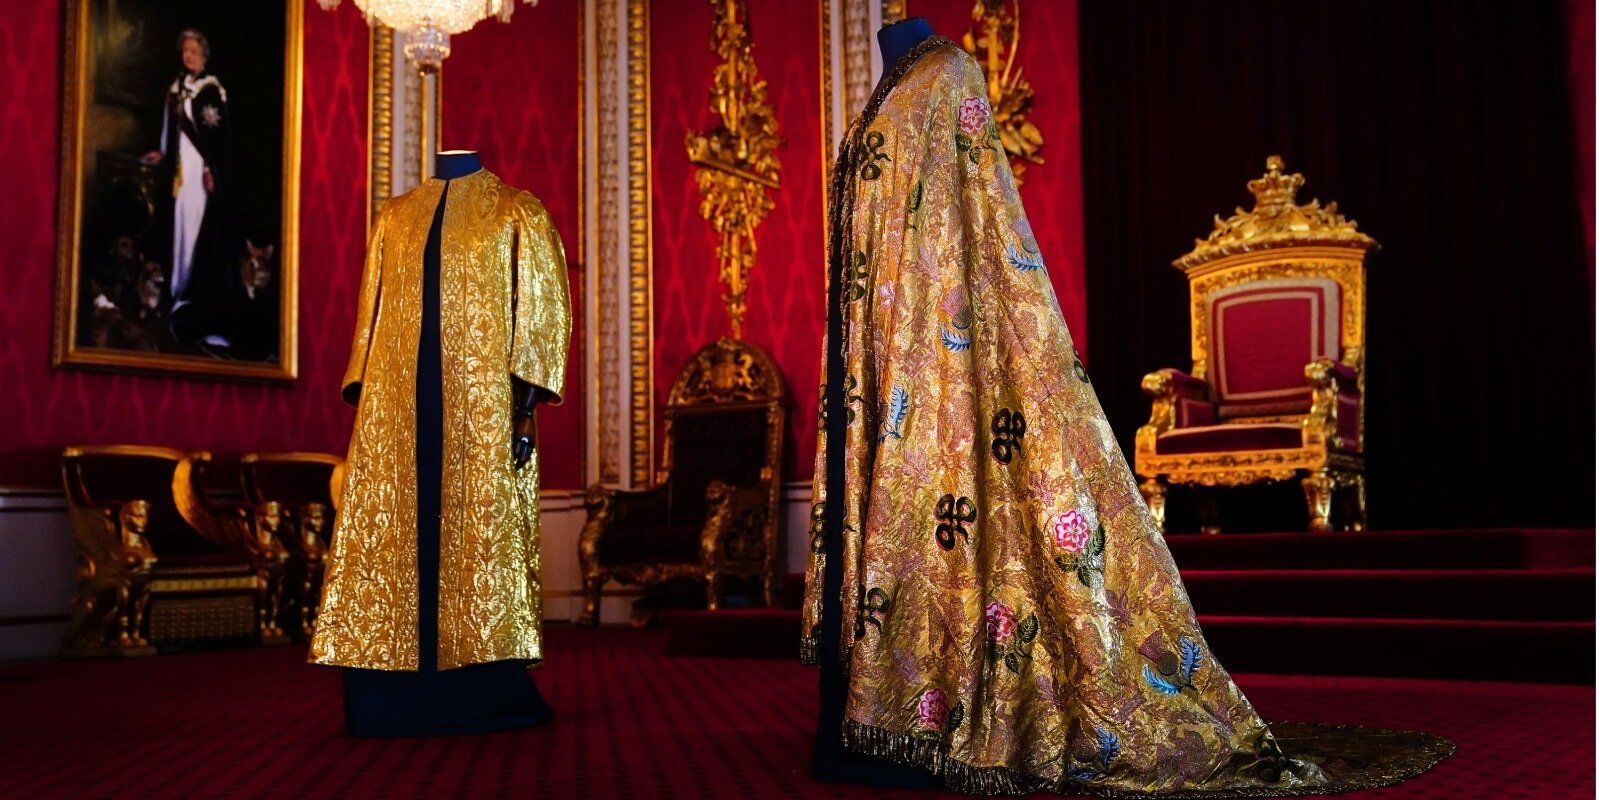 King Charles coronation Supertunica and Imperial Mantle will be worn at his coronation.